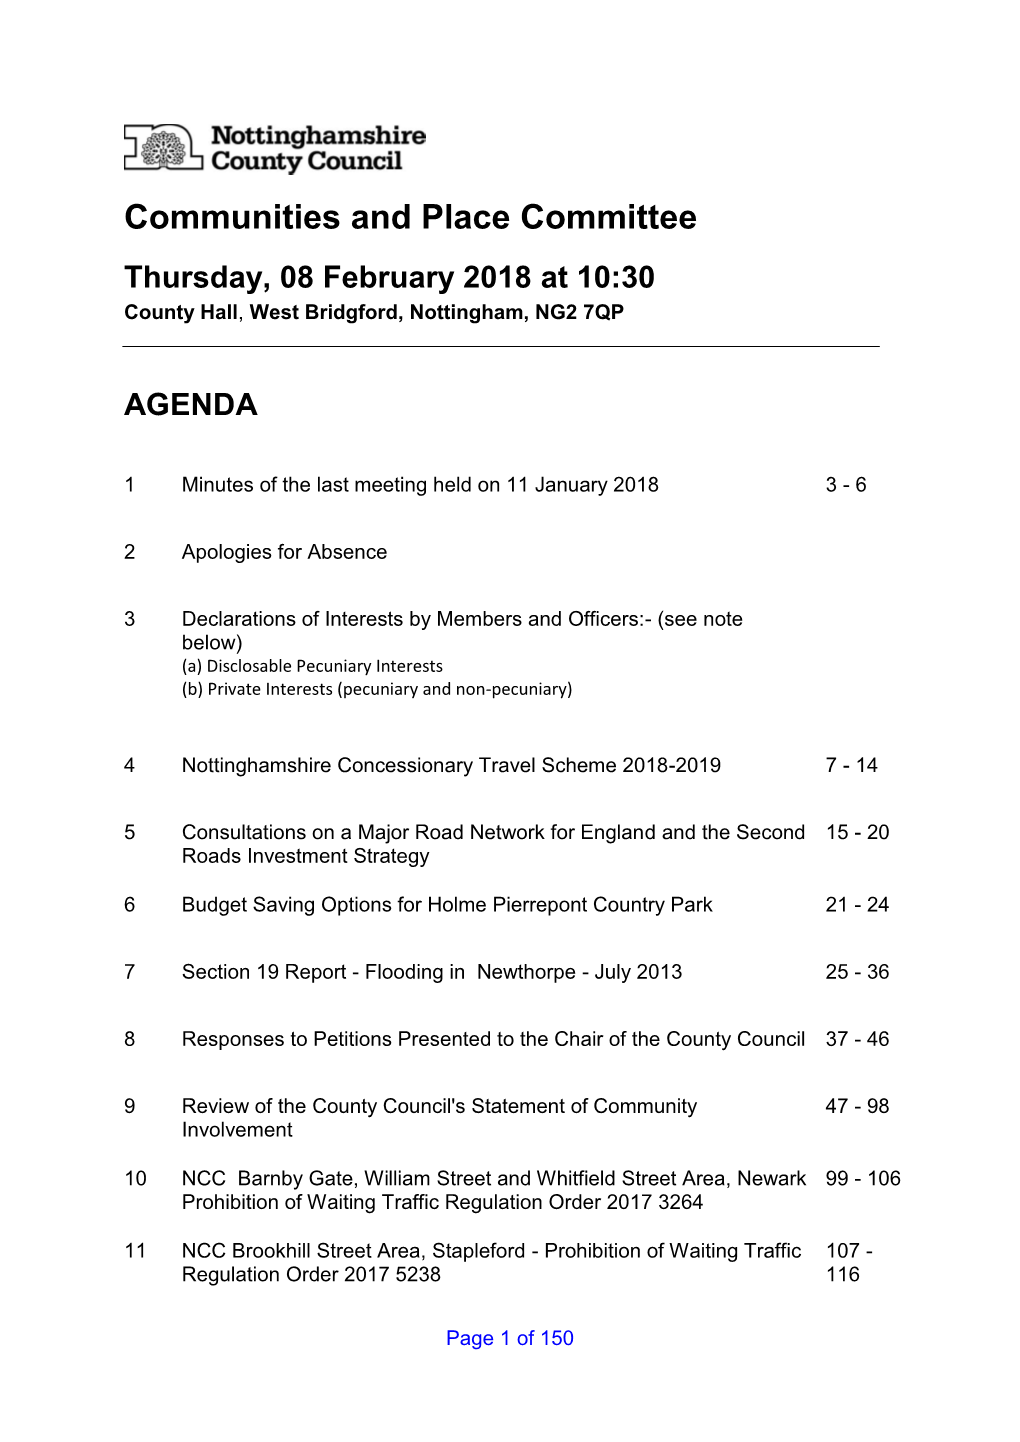 Communities and Place Committee Thursday, 08 February 2018 at 10:30 County Hall, West Bridgford, Nottingham, NG2 7QP